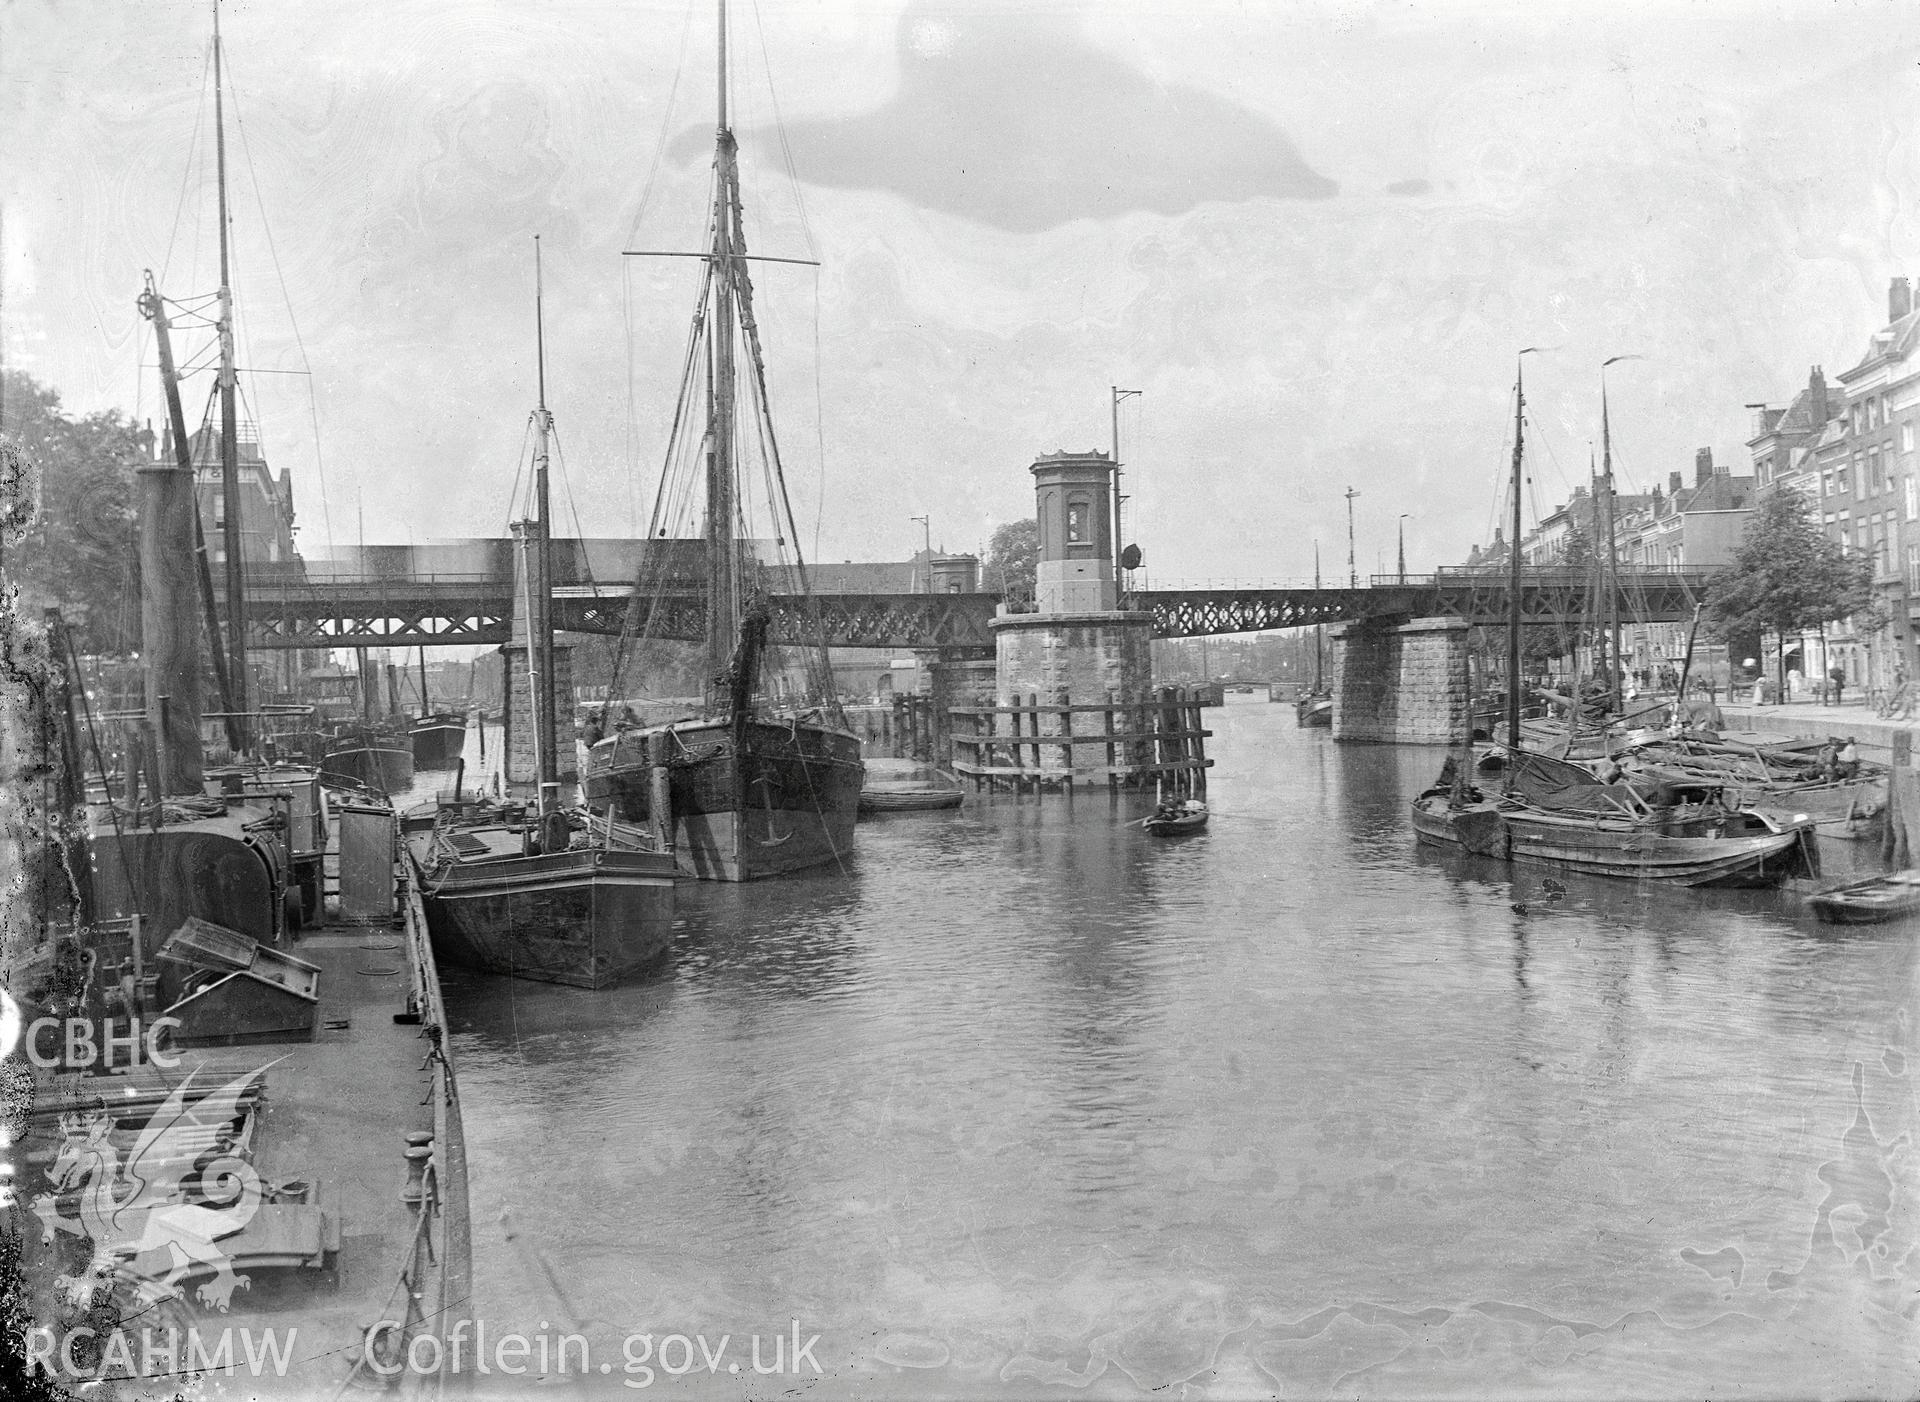 Black and white image dating from c.1910 showing a European harbour or river scene crossed by a bridge, featuring a number of sailing vessels, taken by Emile T. Evans.